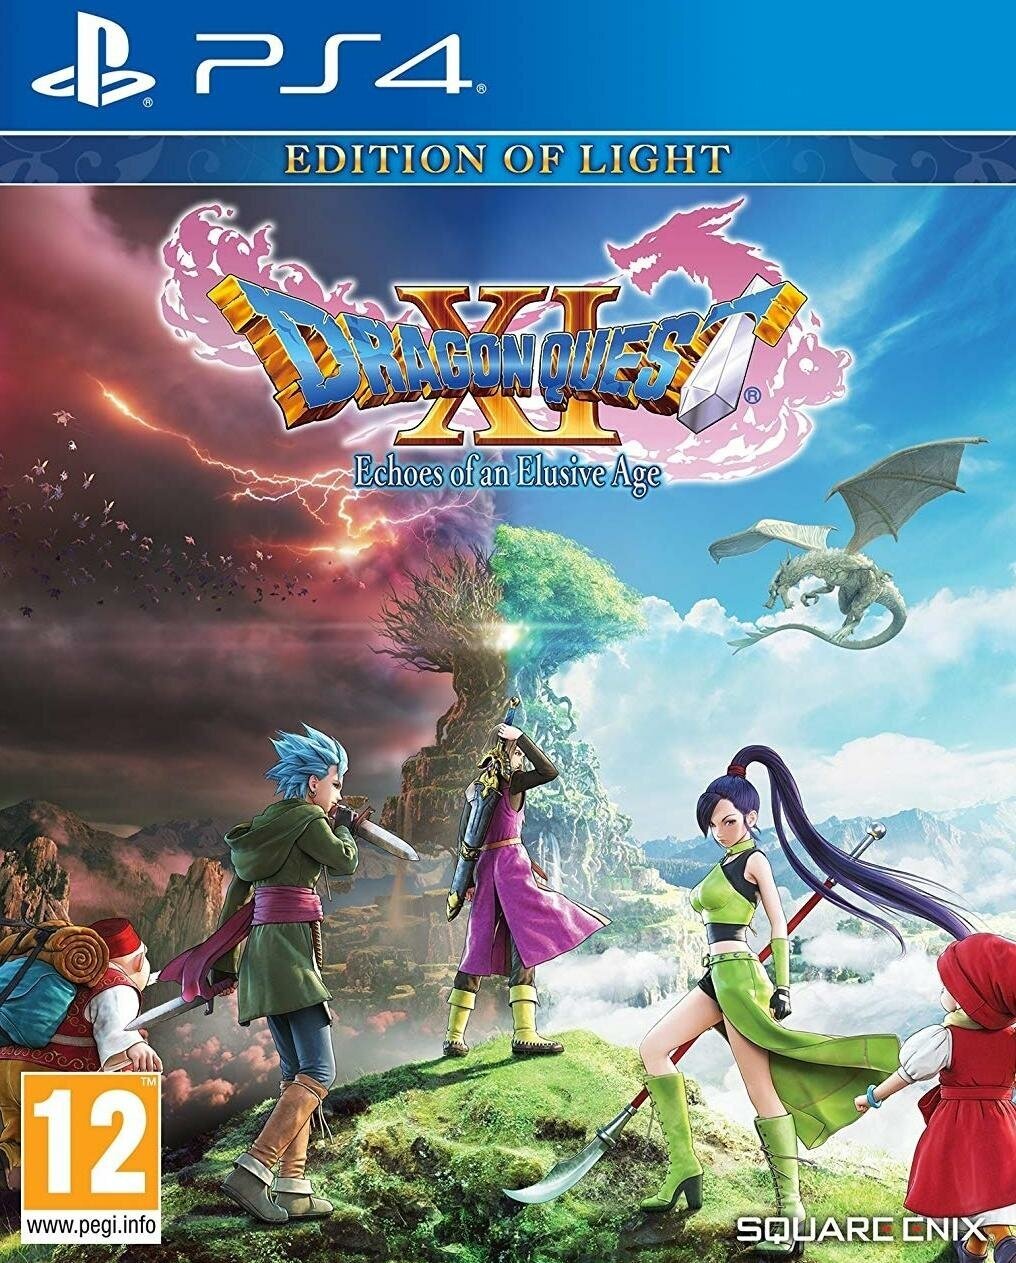 Dragon Quest 11 (XI): Echoes of an Elusive Age Издание Света (Edition of Light) (PS4) английский язык